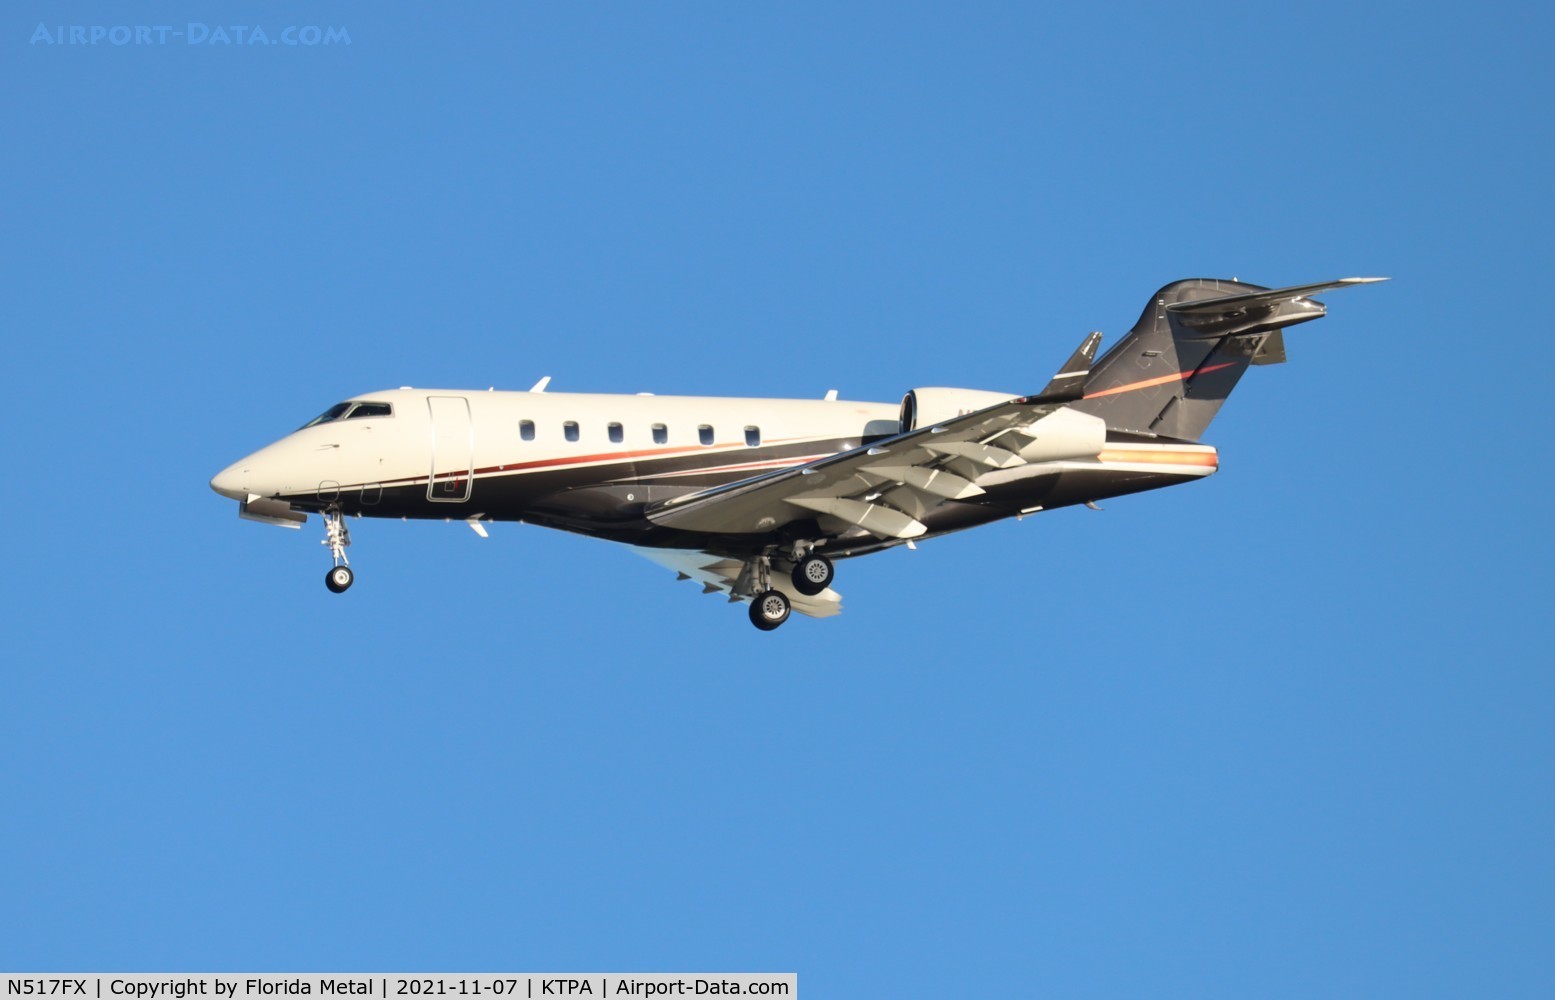 N517FX, 2004 Bombardier Challenger 300 (BD-100-1A10) C/N 20038, Challenger 300 zx